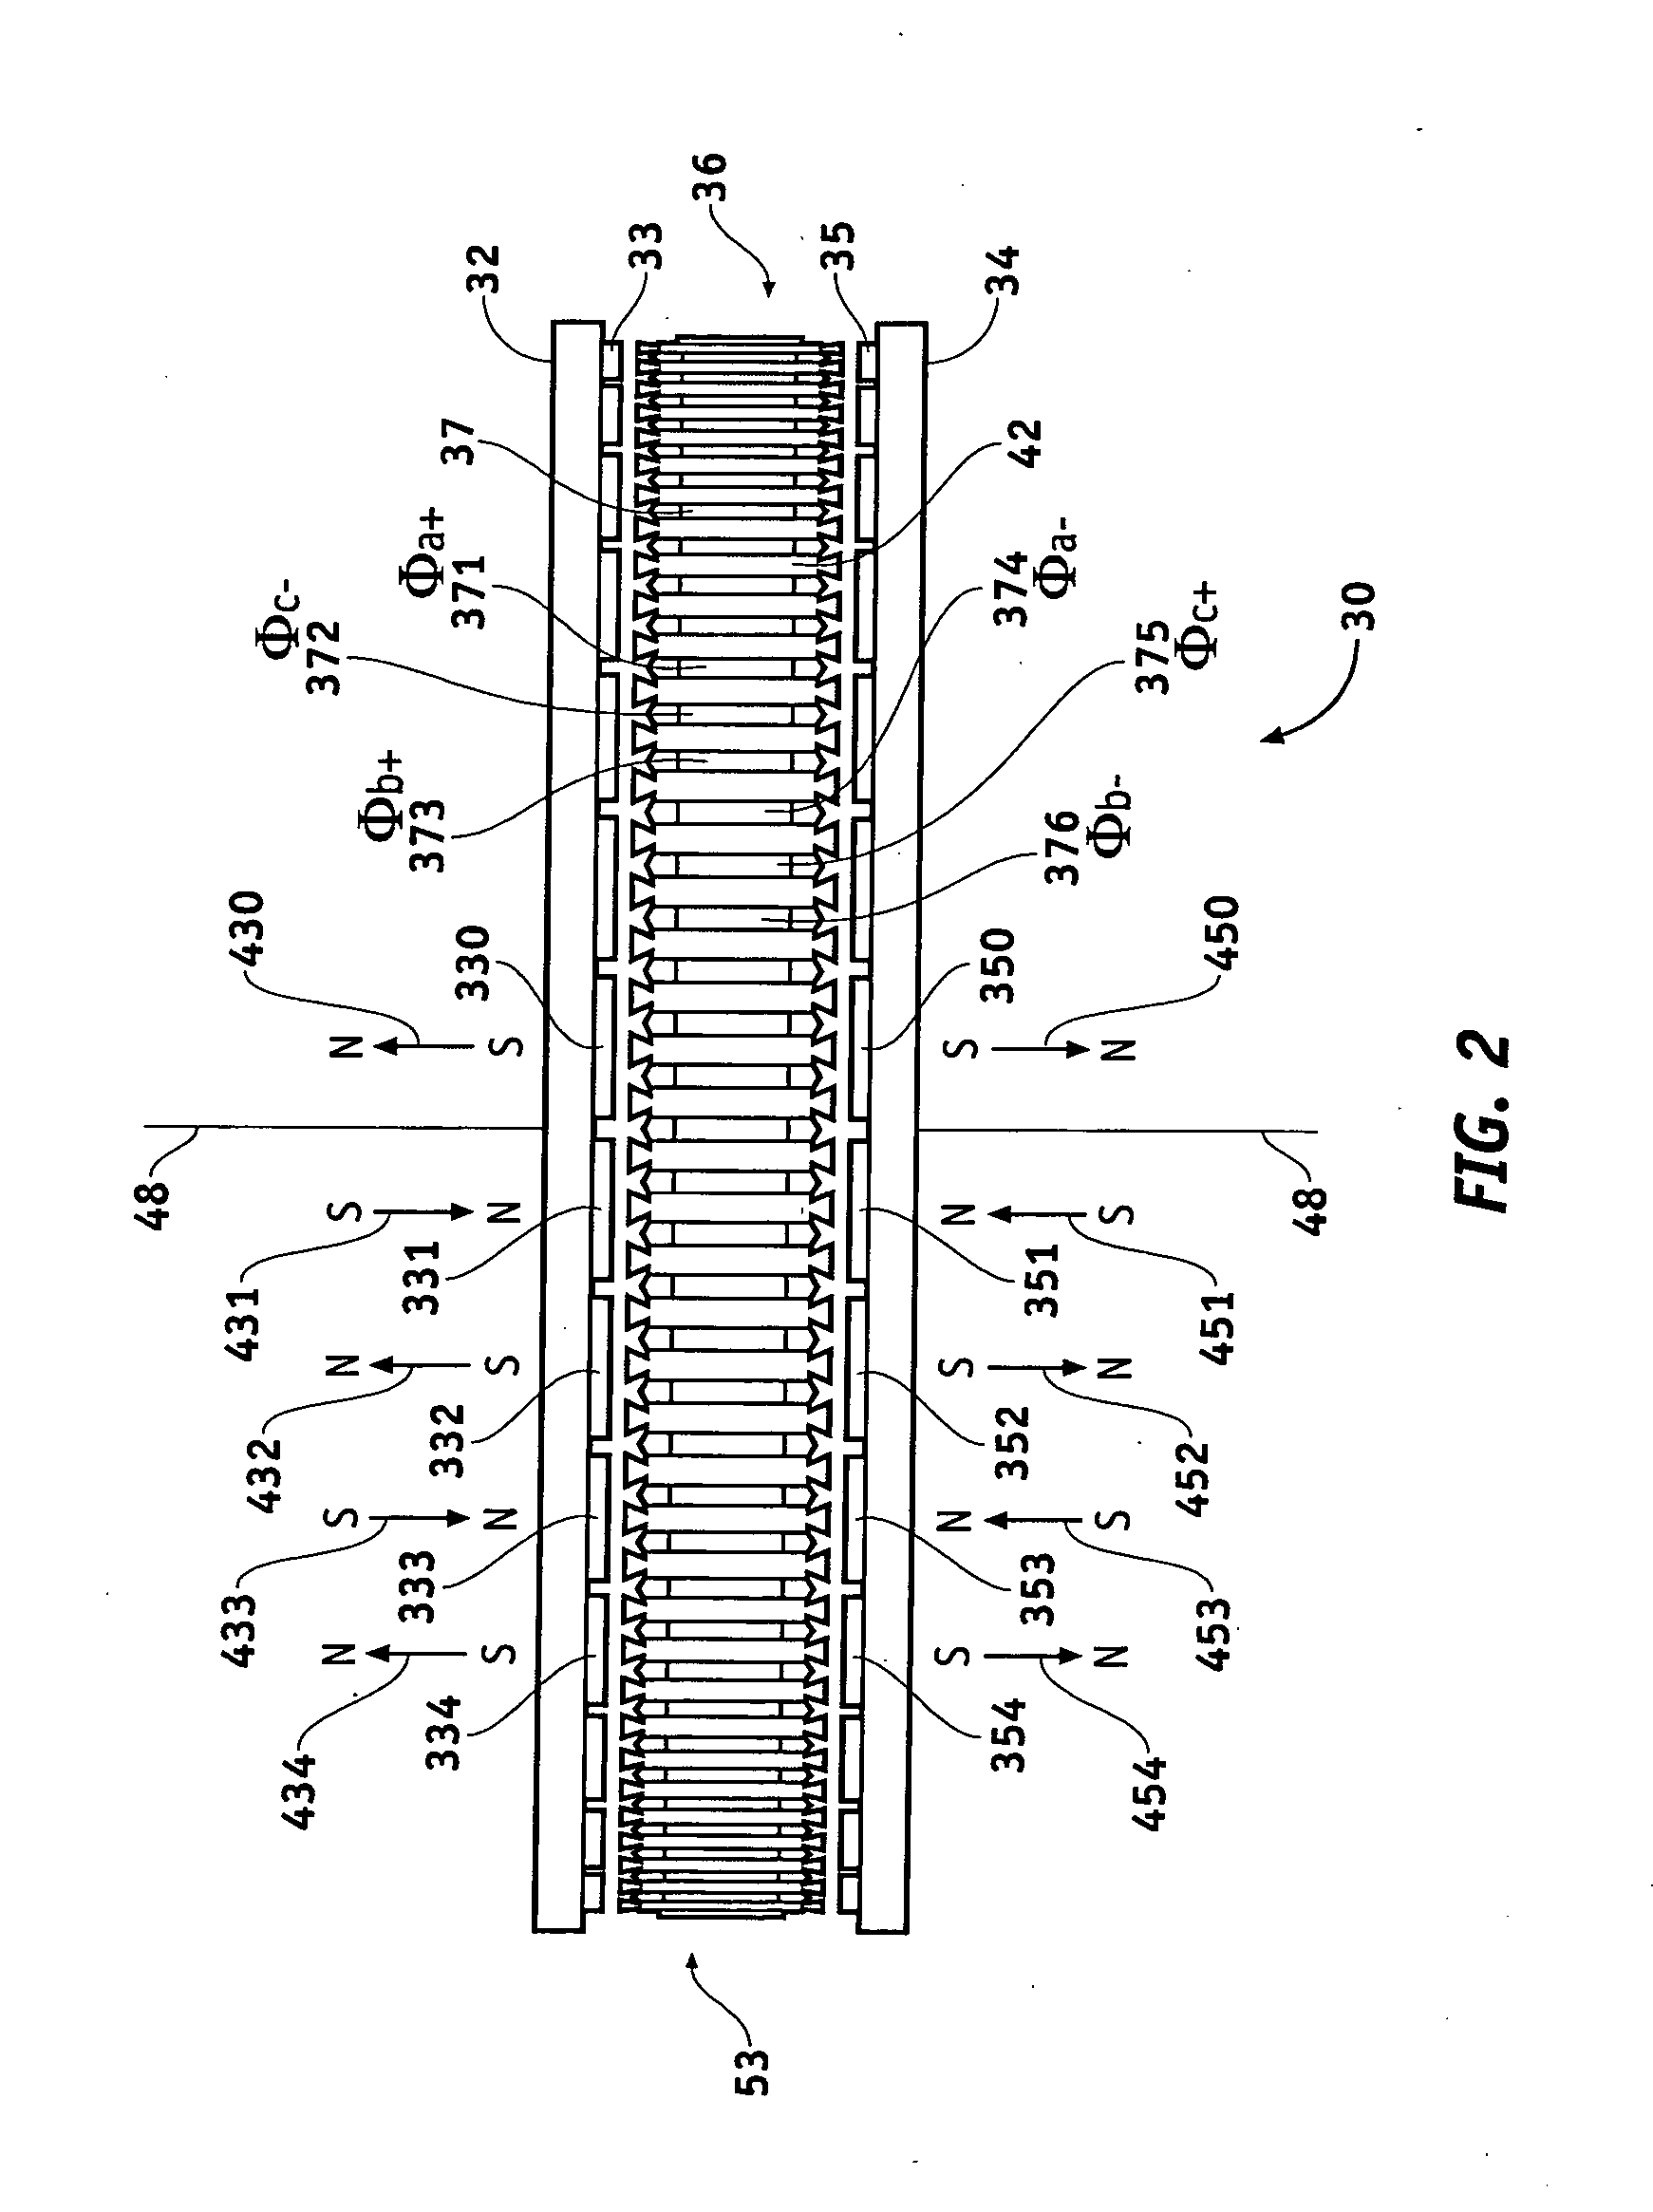 Axial flux motor mass reduction with improved cooling